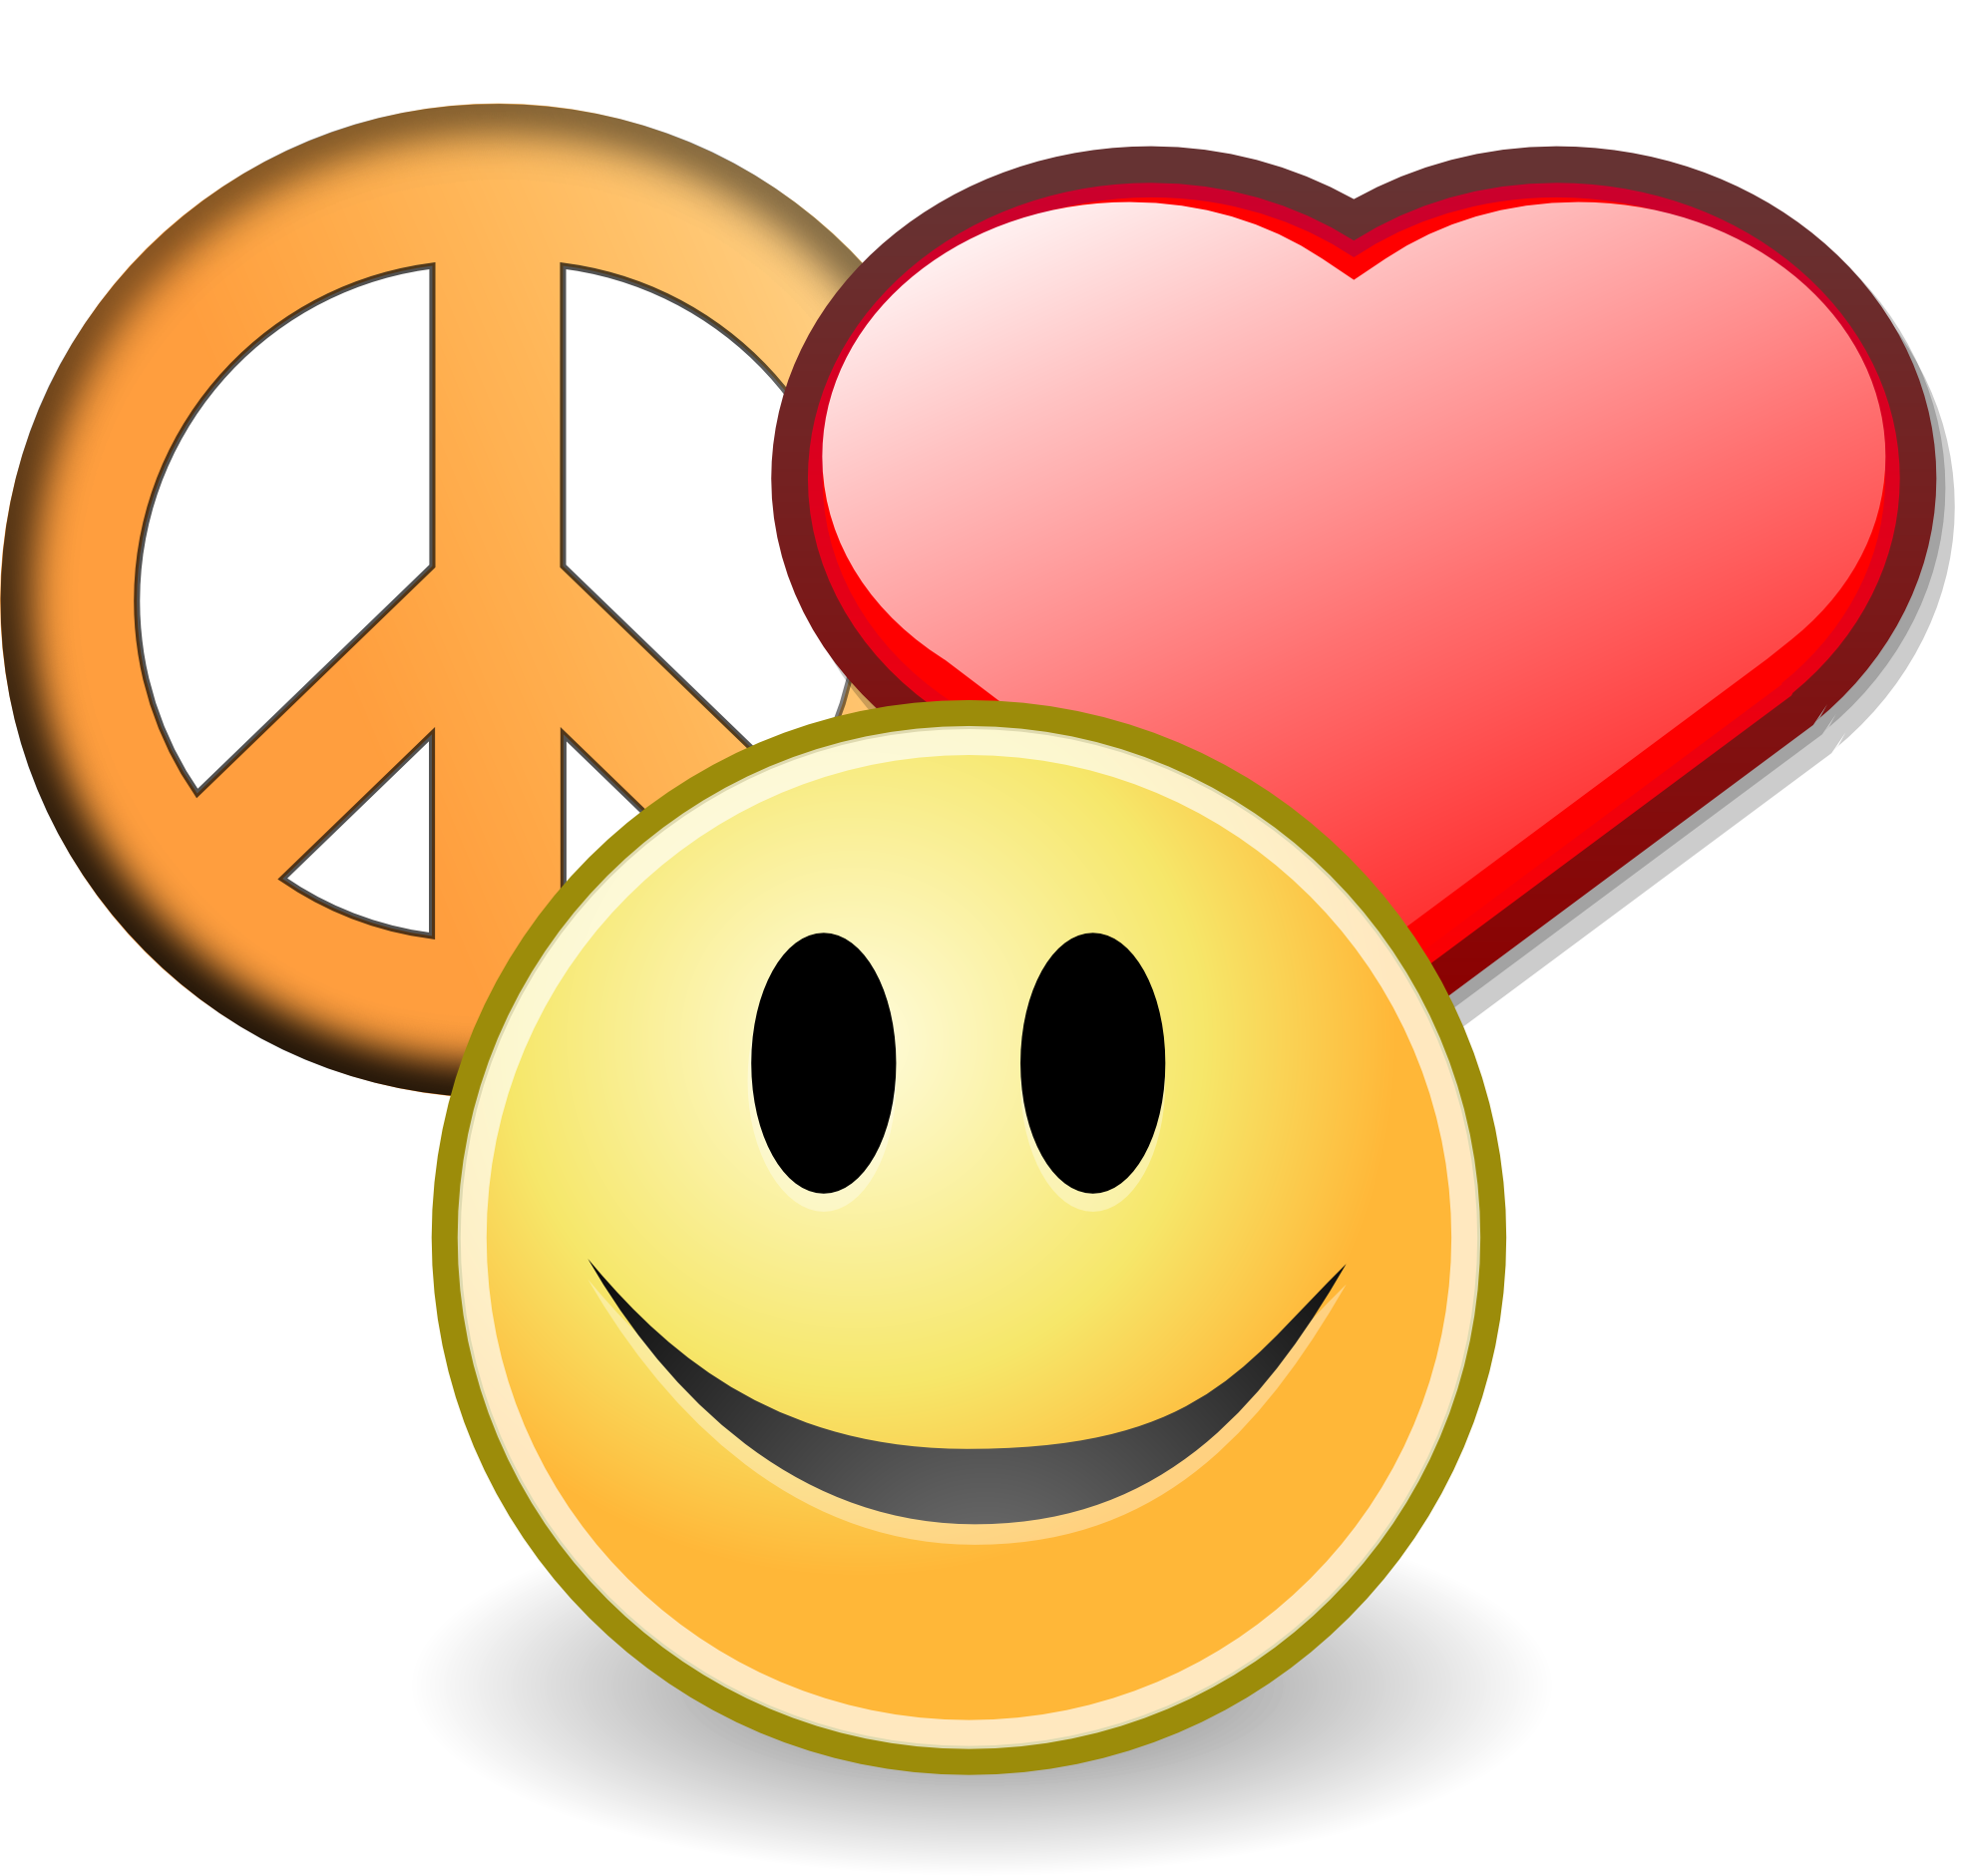 Free peace sign clipart 3 image